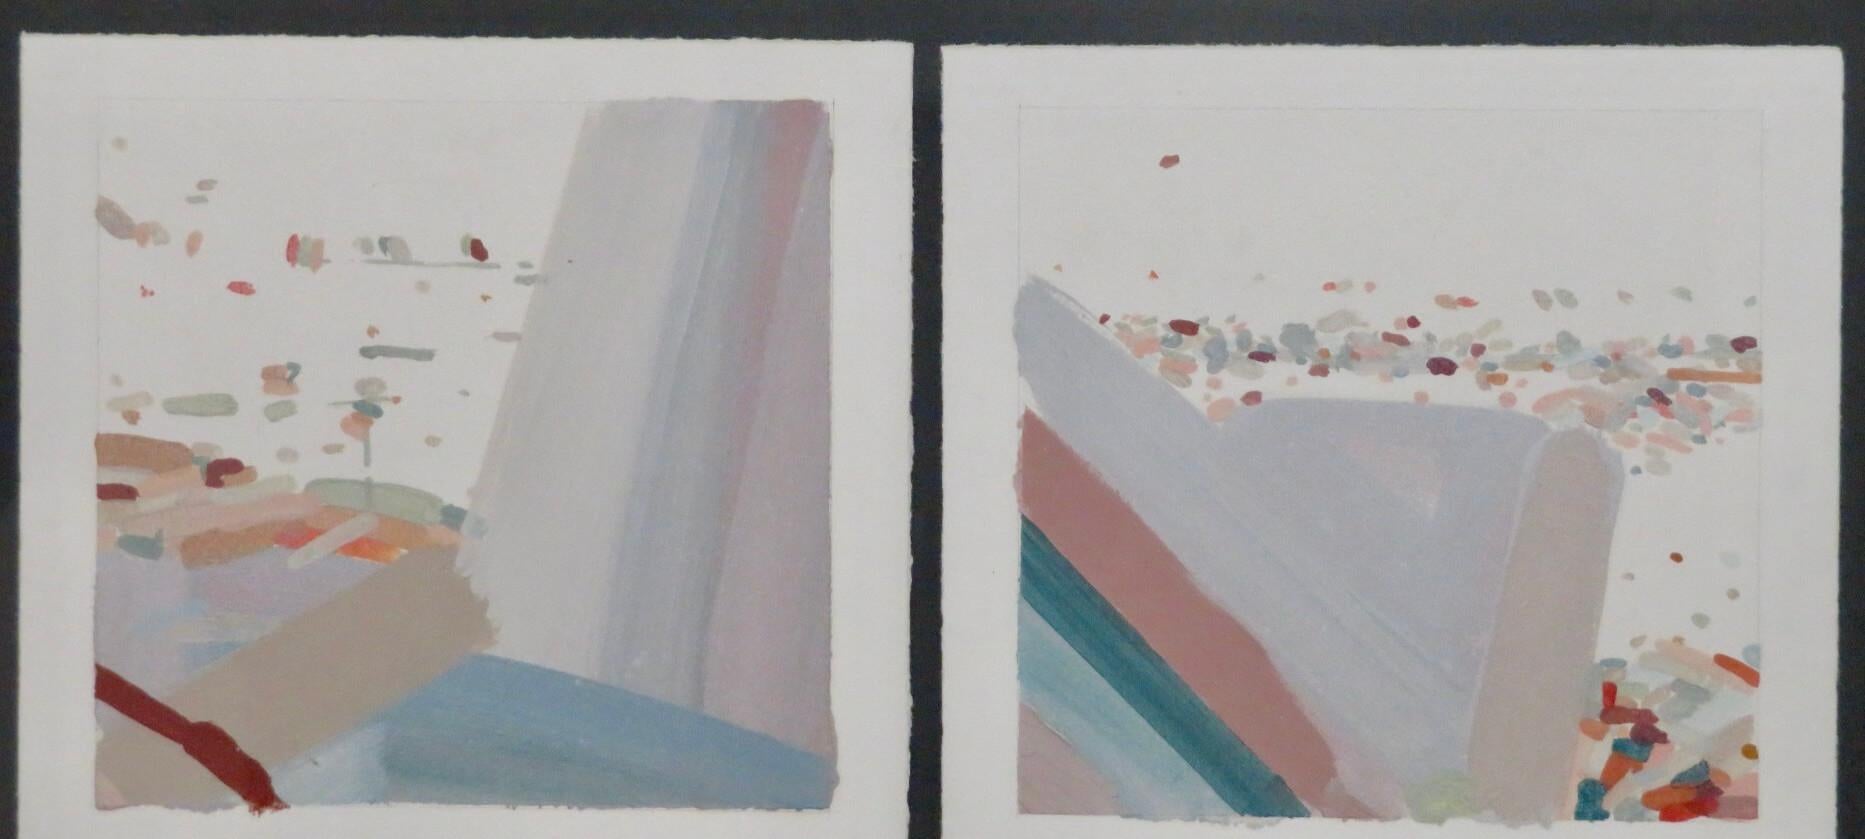 ARTIST: John Loker (1938-) British

TITLE: “Abstract Shifts In Four Panels”

SIGNED: labelled verso

MEDIUM: oil on paper

SIZE: 61cm x 63cm inc frame

CONDITION: excellent

DETAIL: Described by Ben Lewis as “one of modern Britain’s most original,